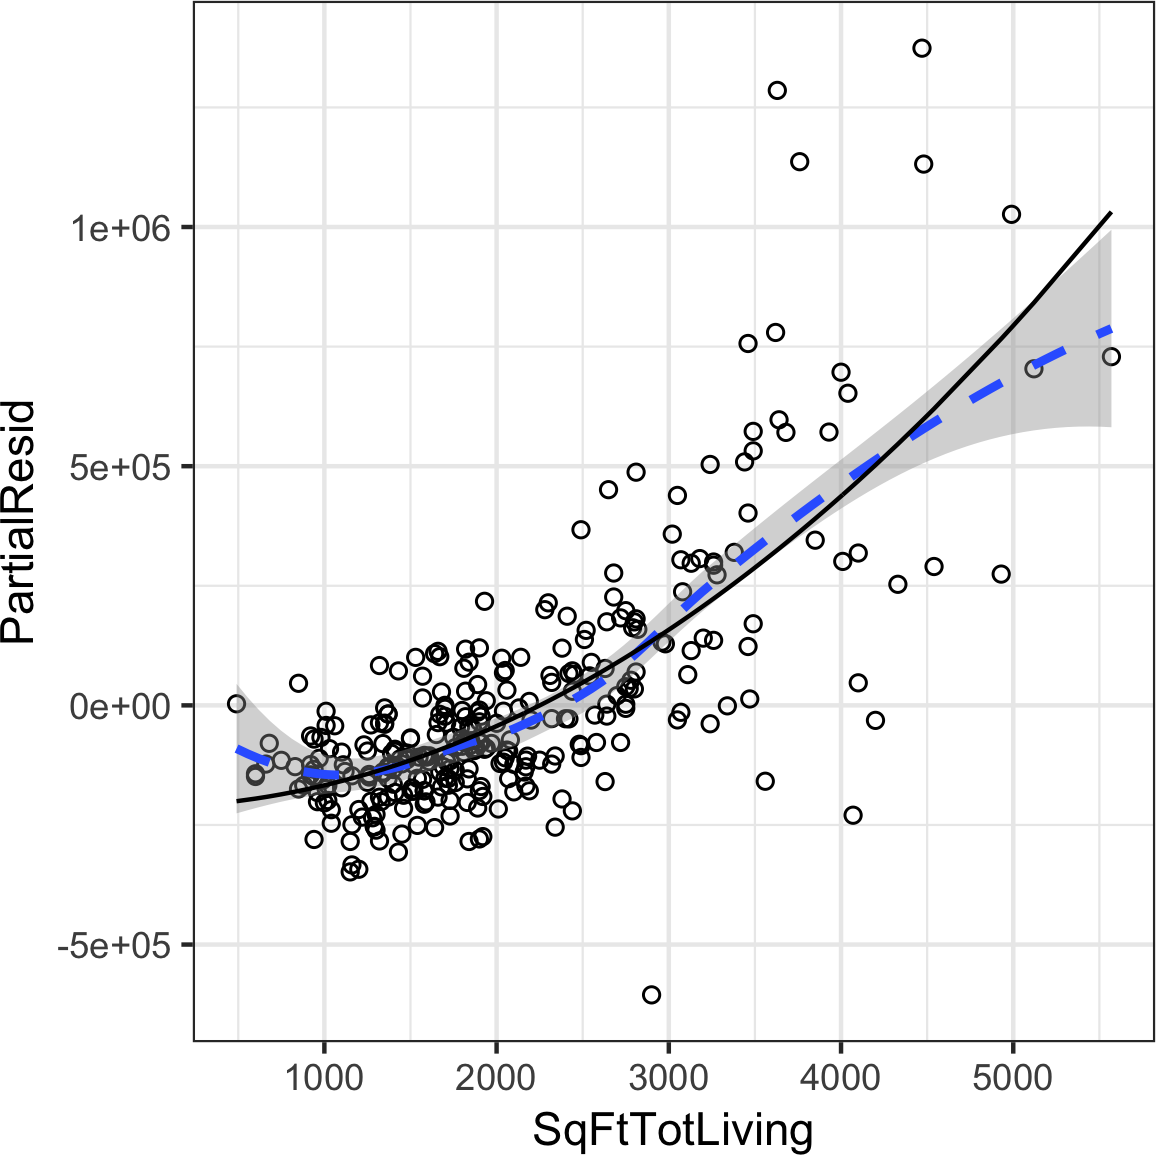 A polynomial regression fit for the variable SqFtTotLiving (solid line) versus a smooth (dashed line)